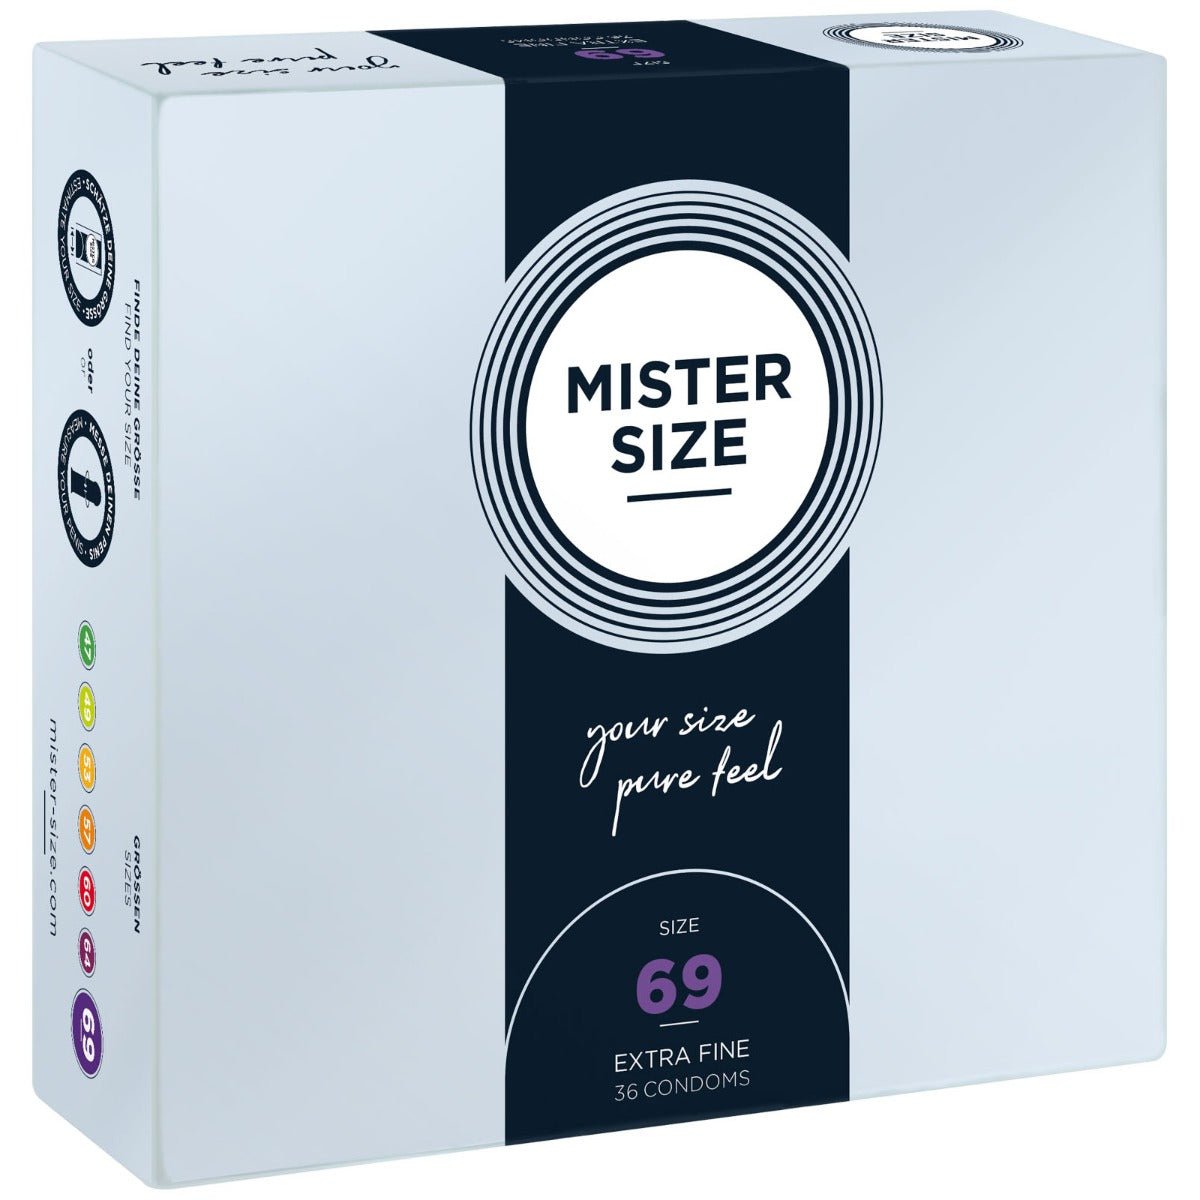 Condoms MISTER SIZE - pure feel Condoms - Size 69 mm (36 pack)   